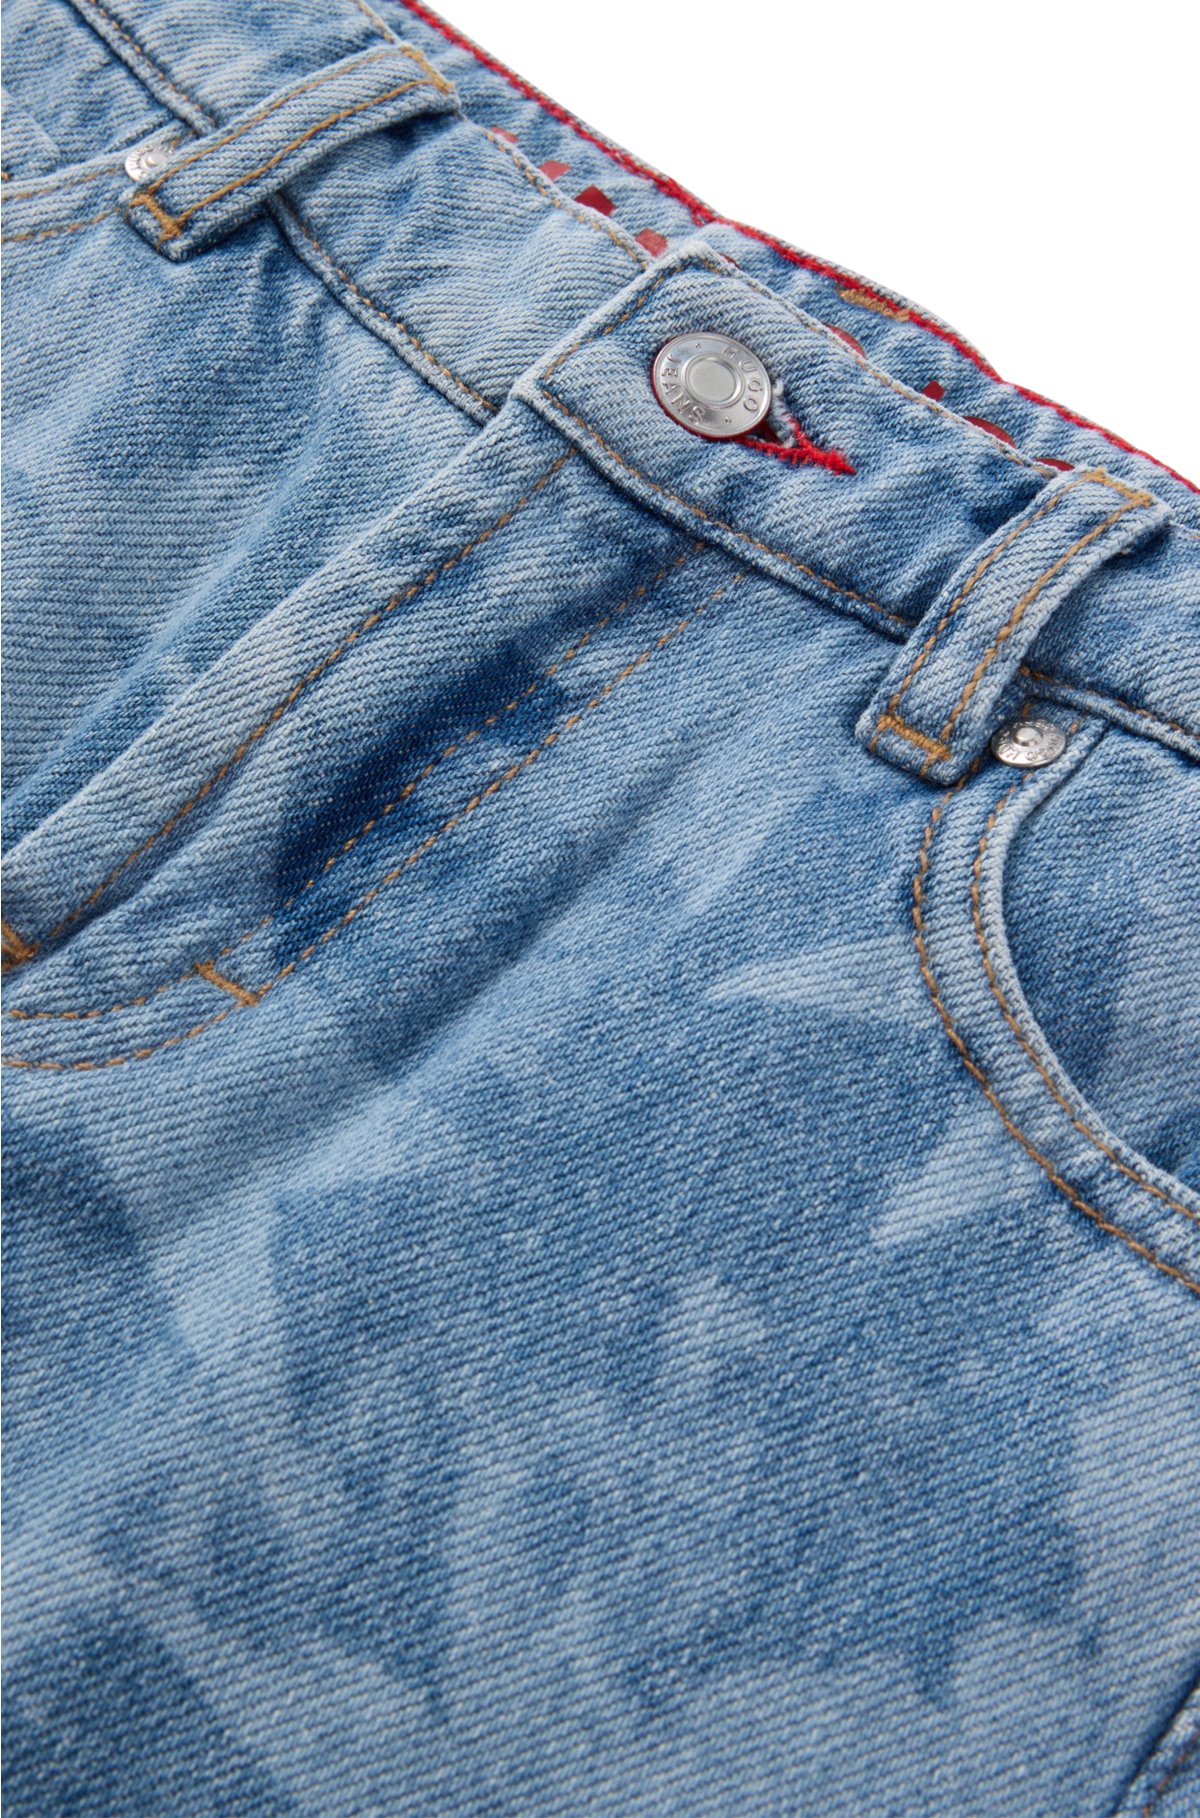 Kids' relaxed-fit jeans in star-print cotton denim, Patterned